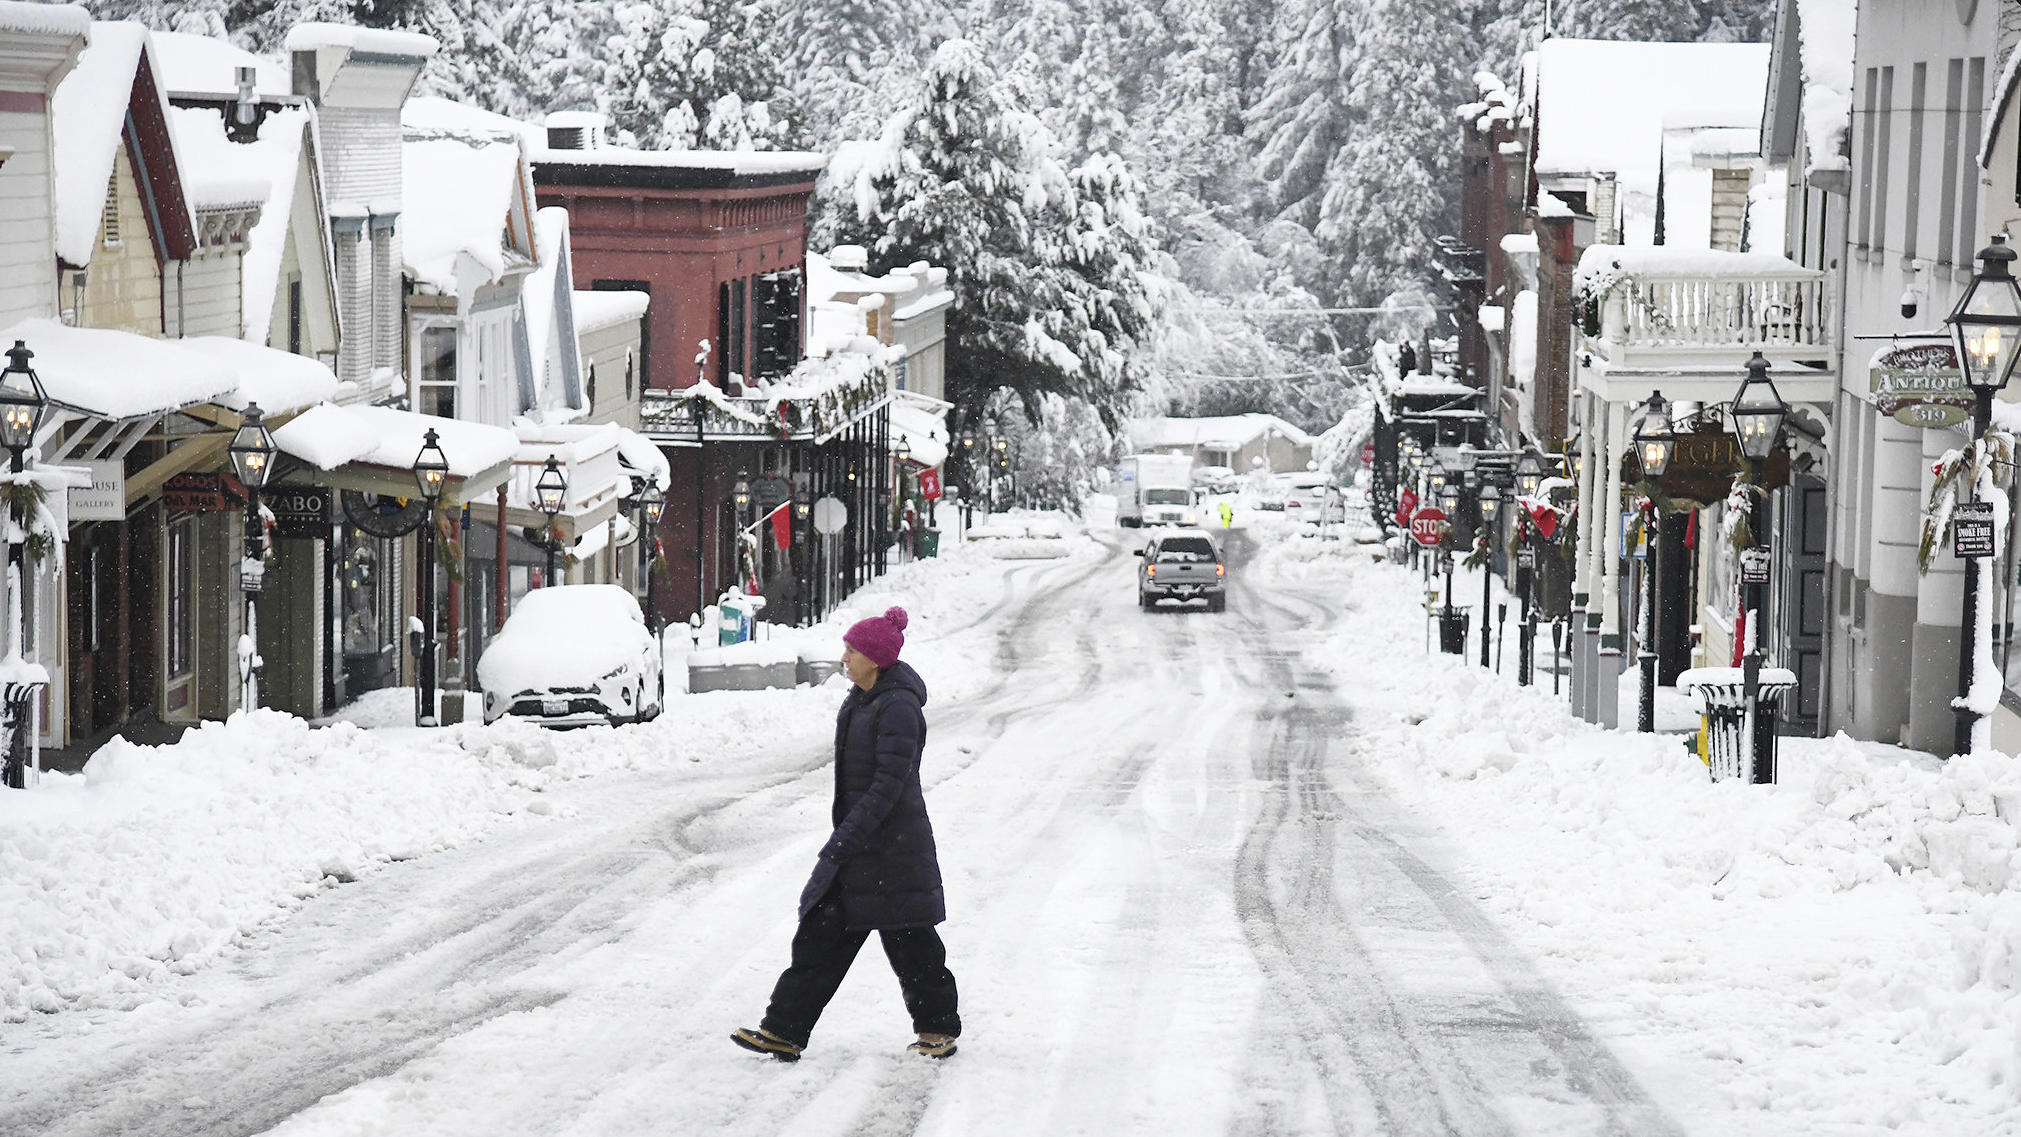 While snowfall was picturesque in places such as along Broad Street in Nevada City, Calif., it was dangerous for many others who were without electricity or stuck in the snow. (Elias Funez/The Union via AP)